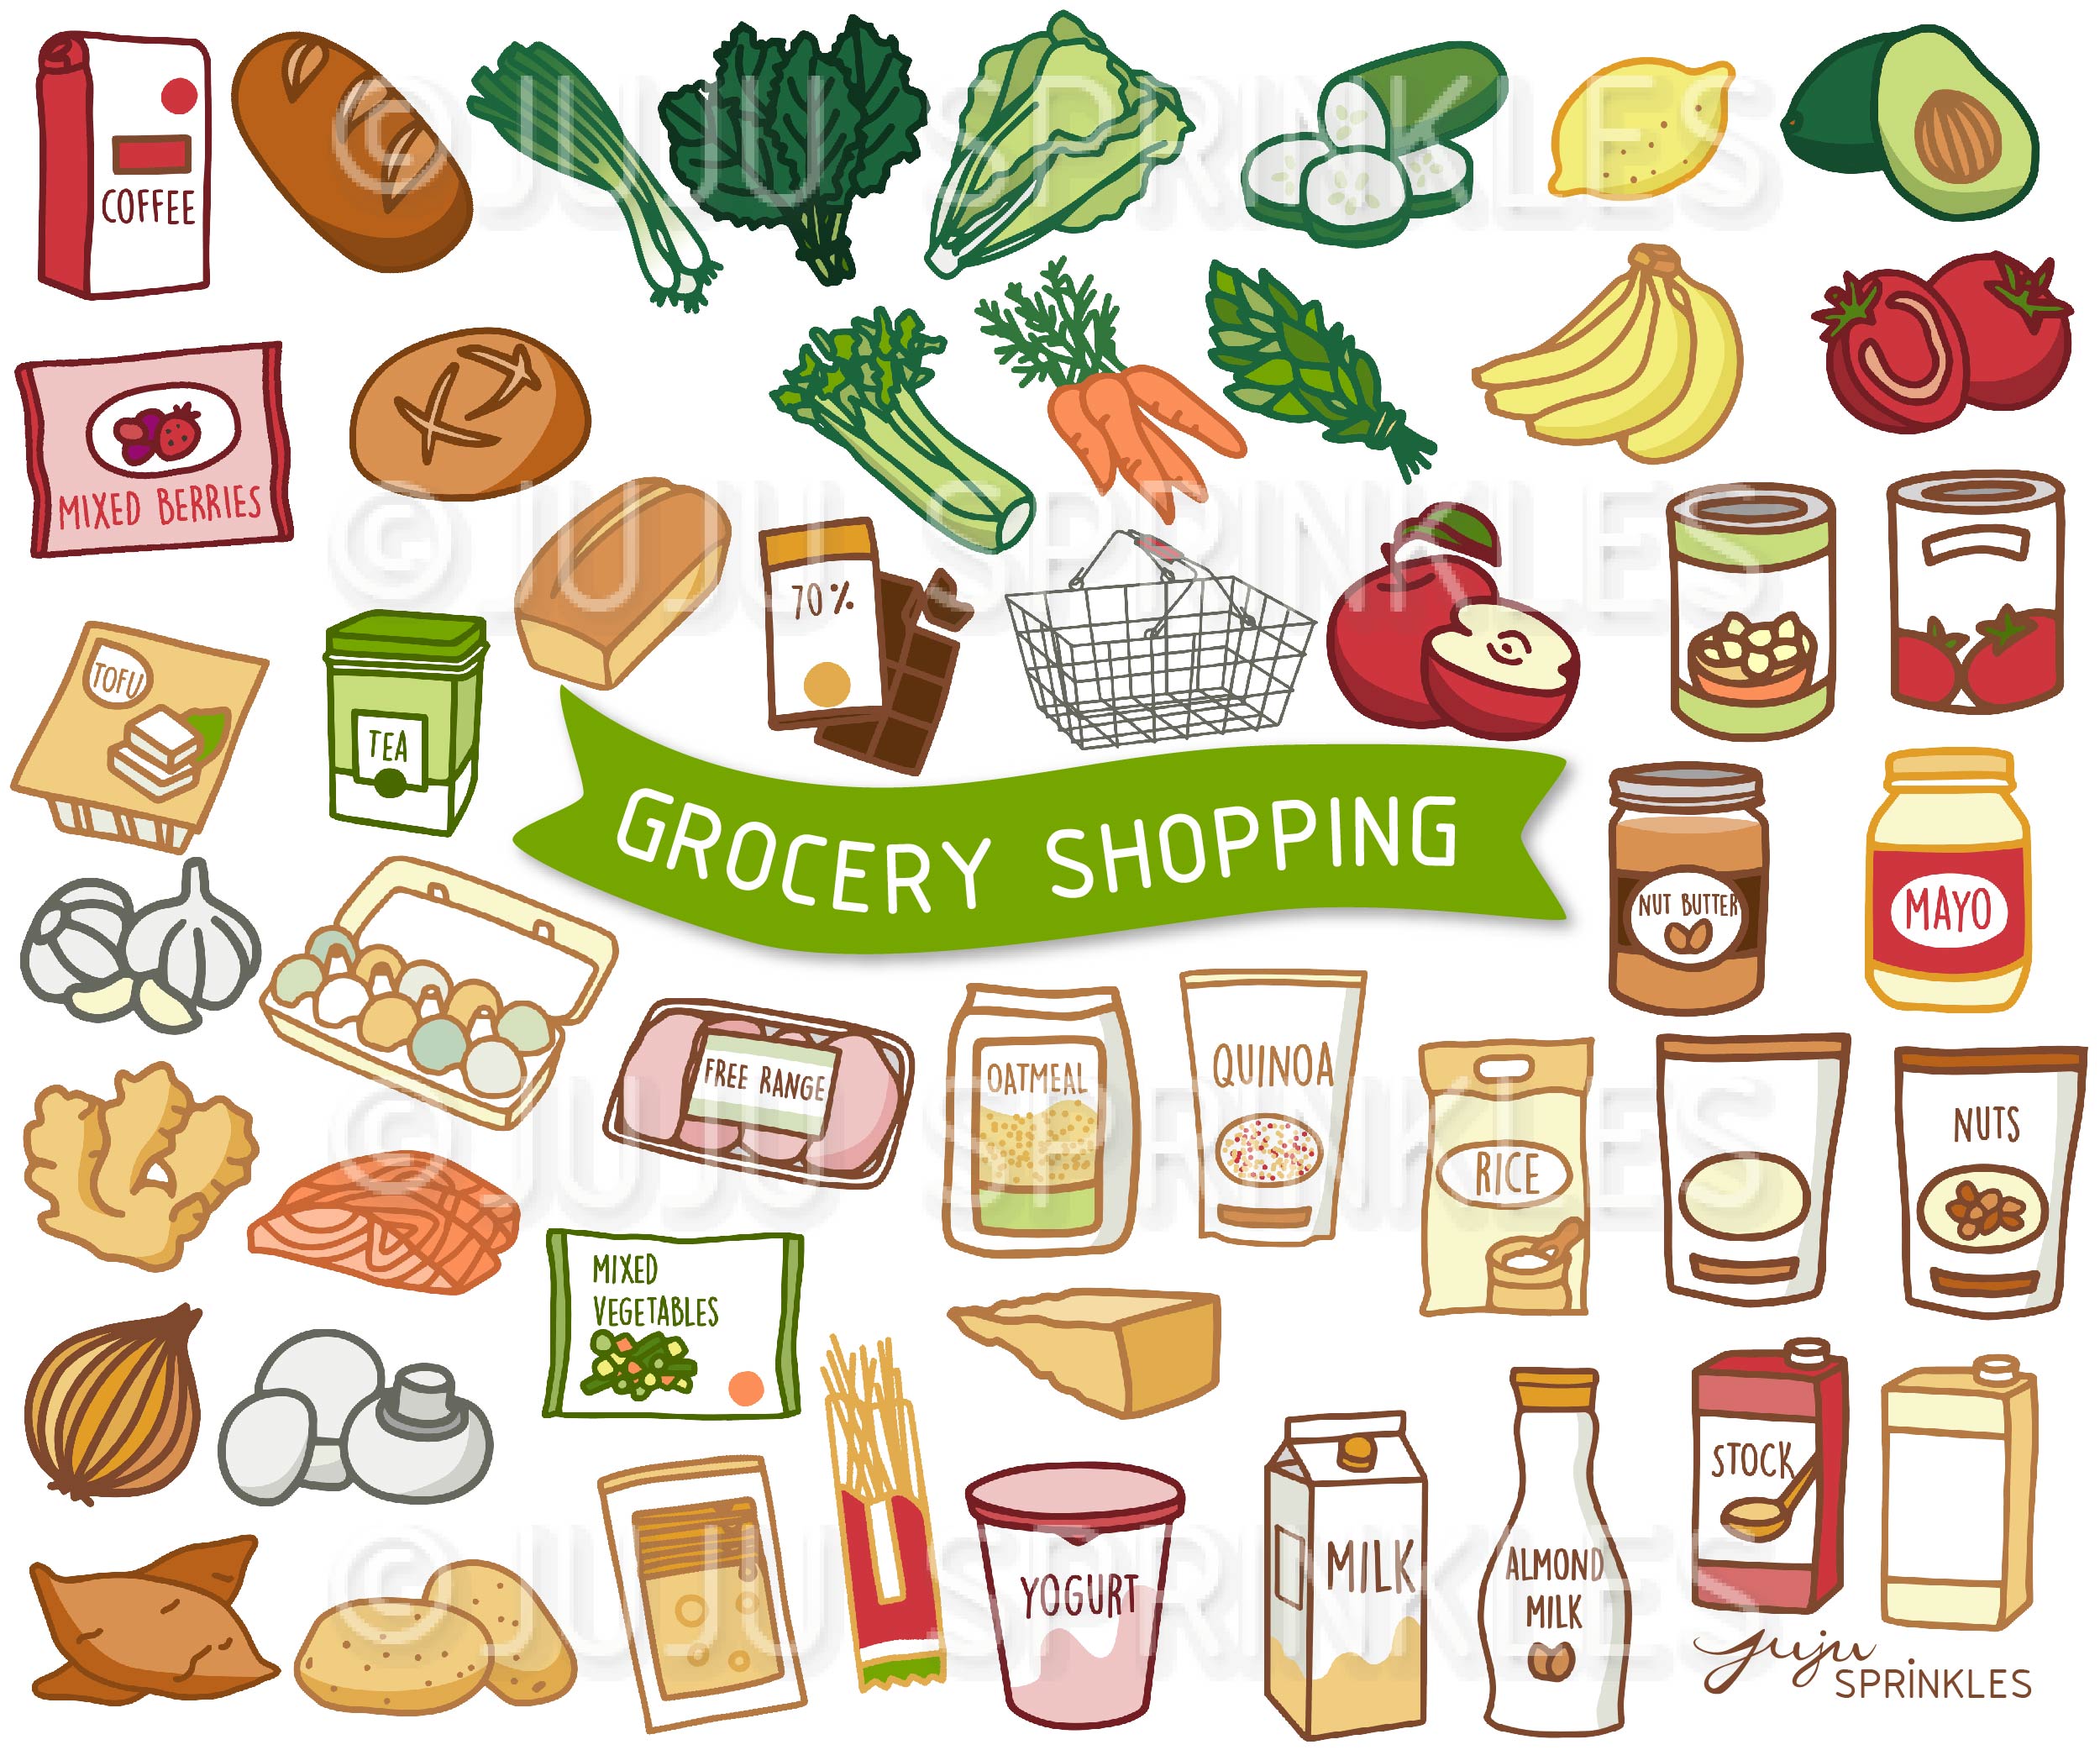 Grocery Shopping Clipart and Sticker Set.